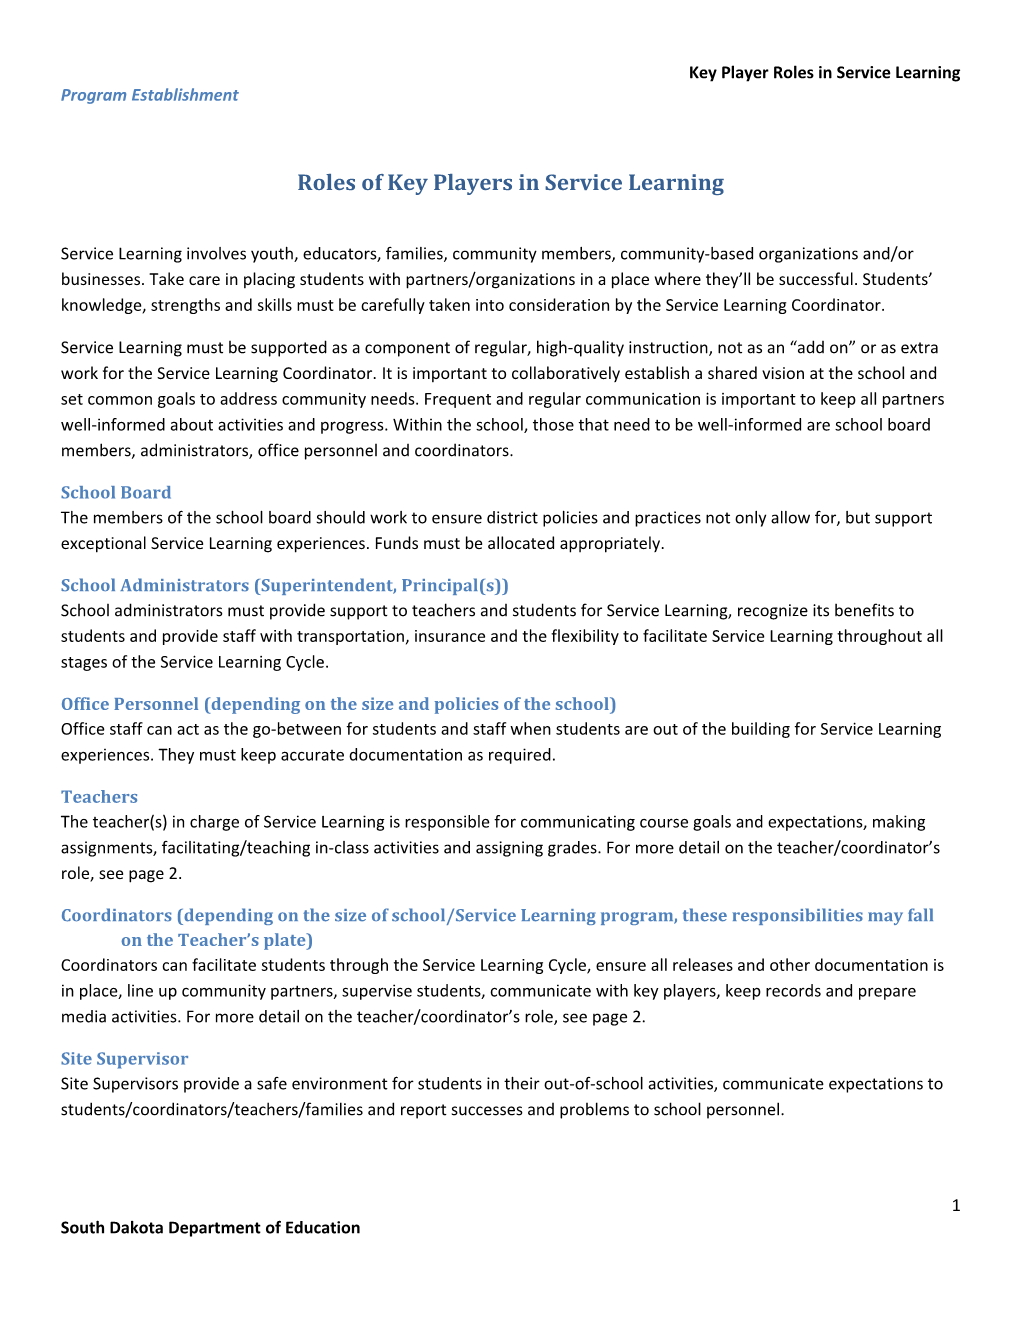 Roles of Key Players in Service Learning